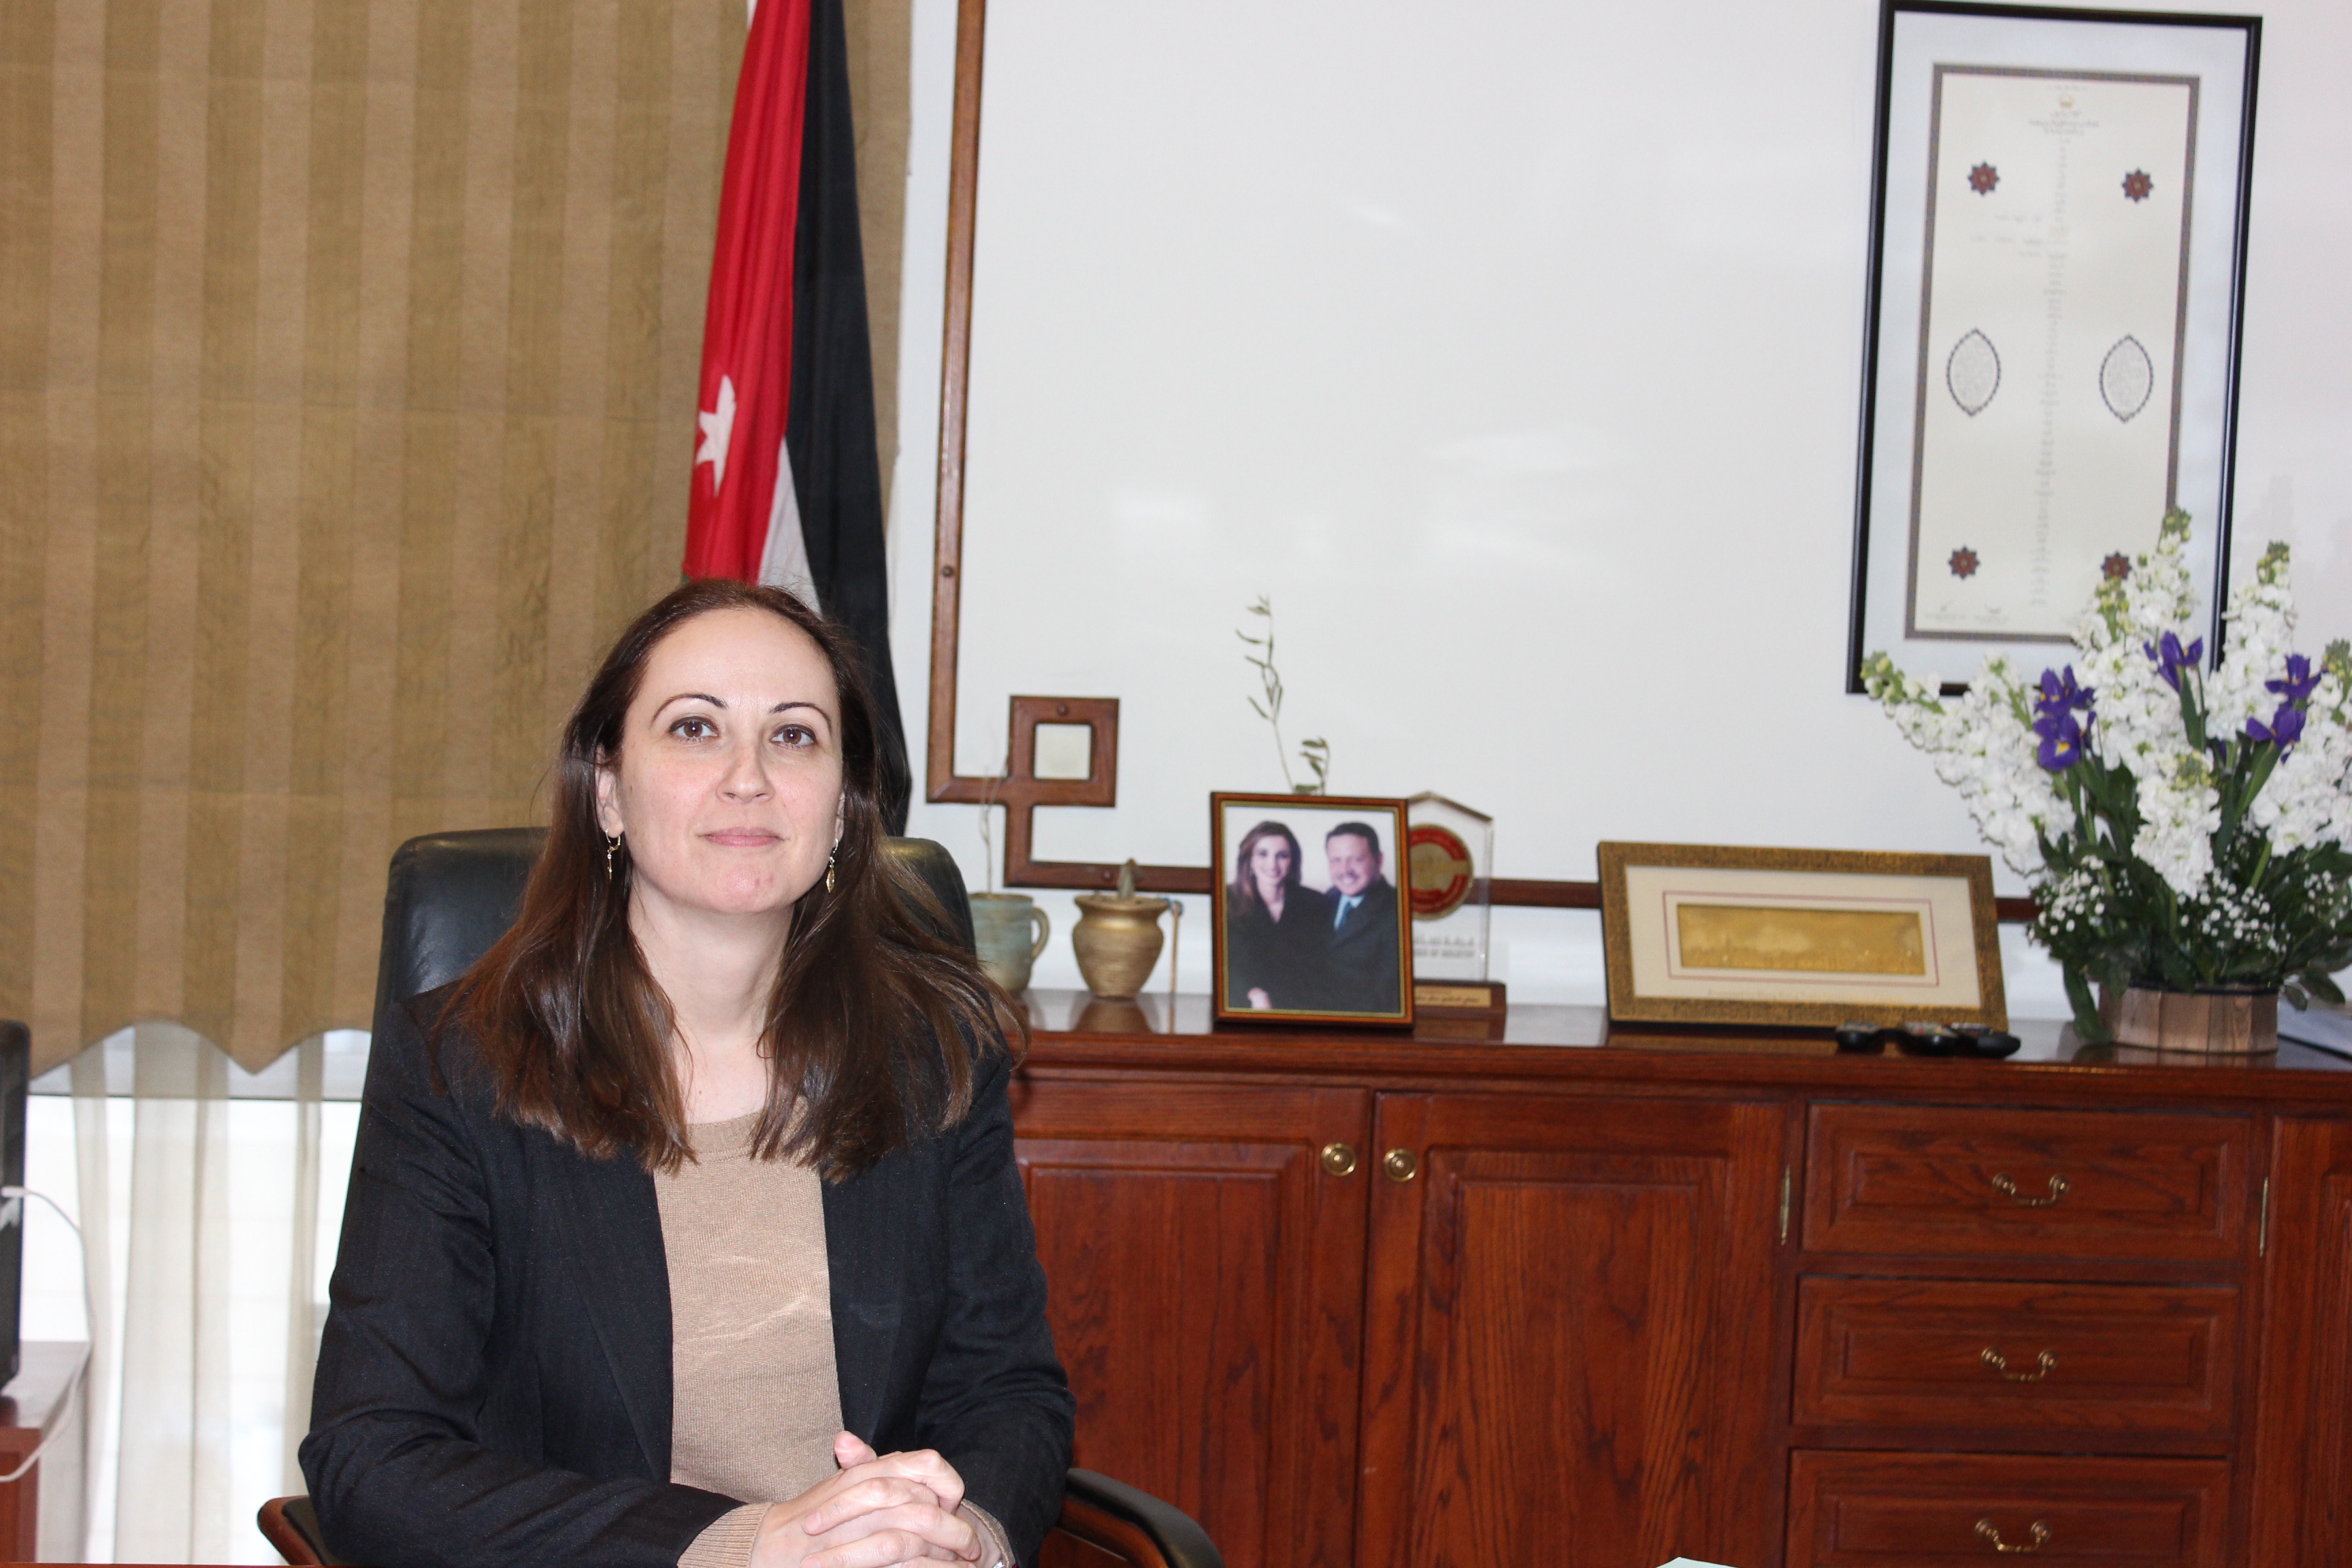 The Jordanian Minister of Commerce and Industry Maha Ali